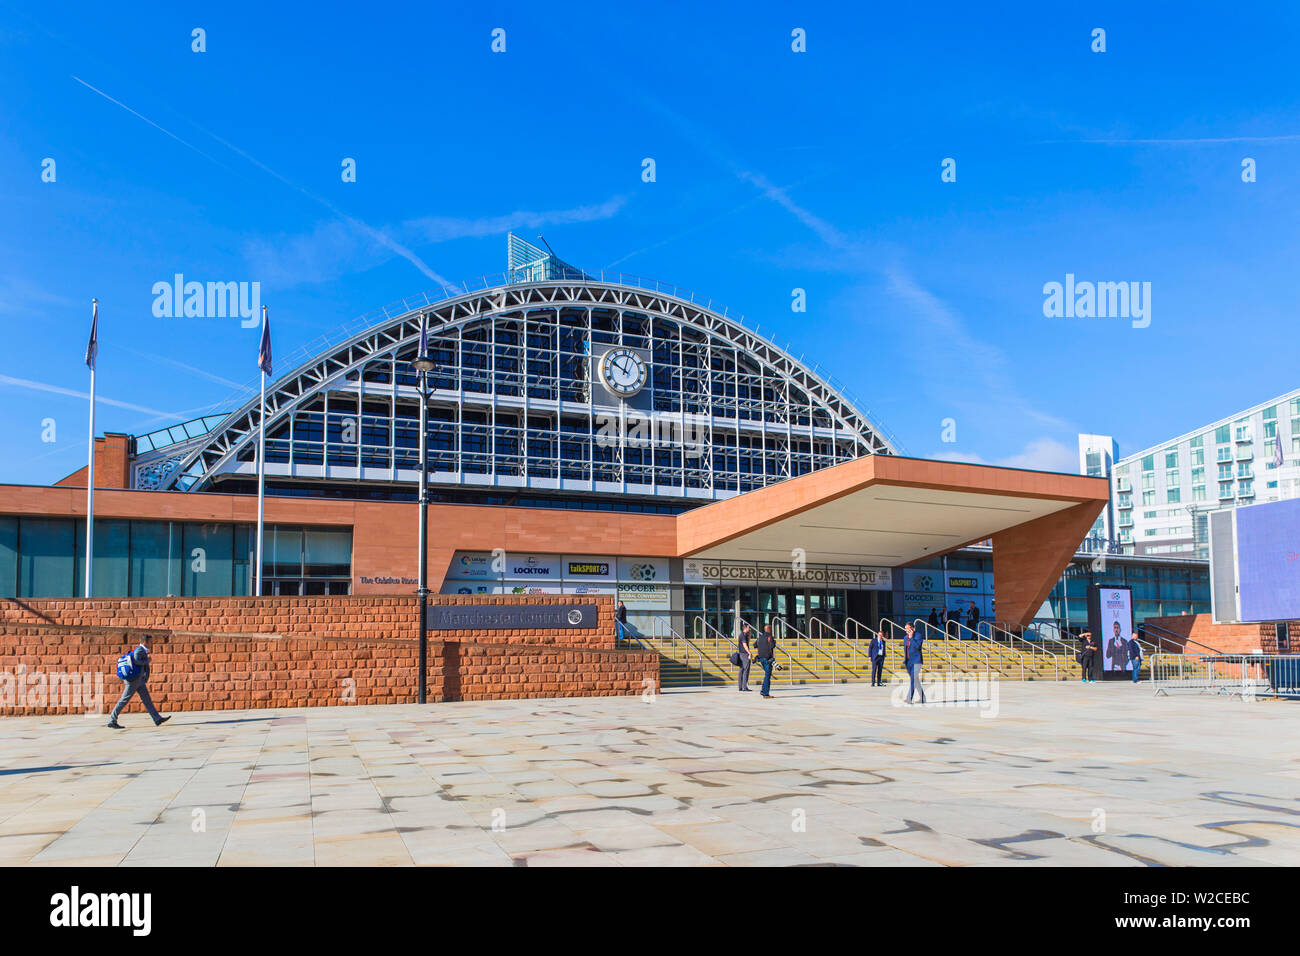 United Kingdom, England, Greater Manchester, Manchester, Manchester Central Convention Center, known as Manchester Central Stock Photo